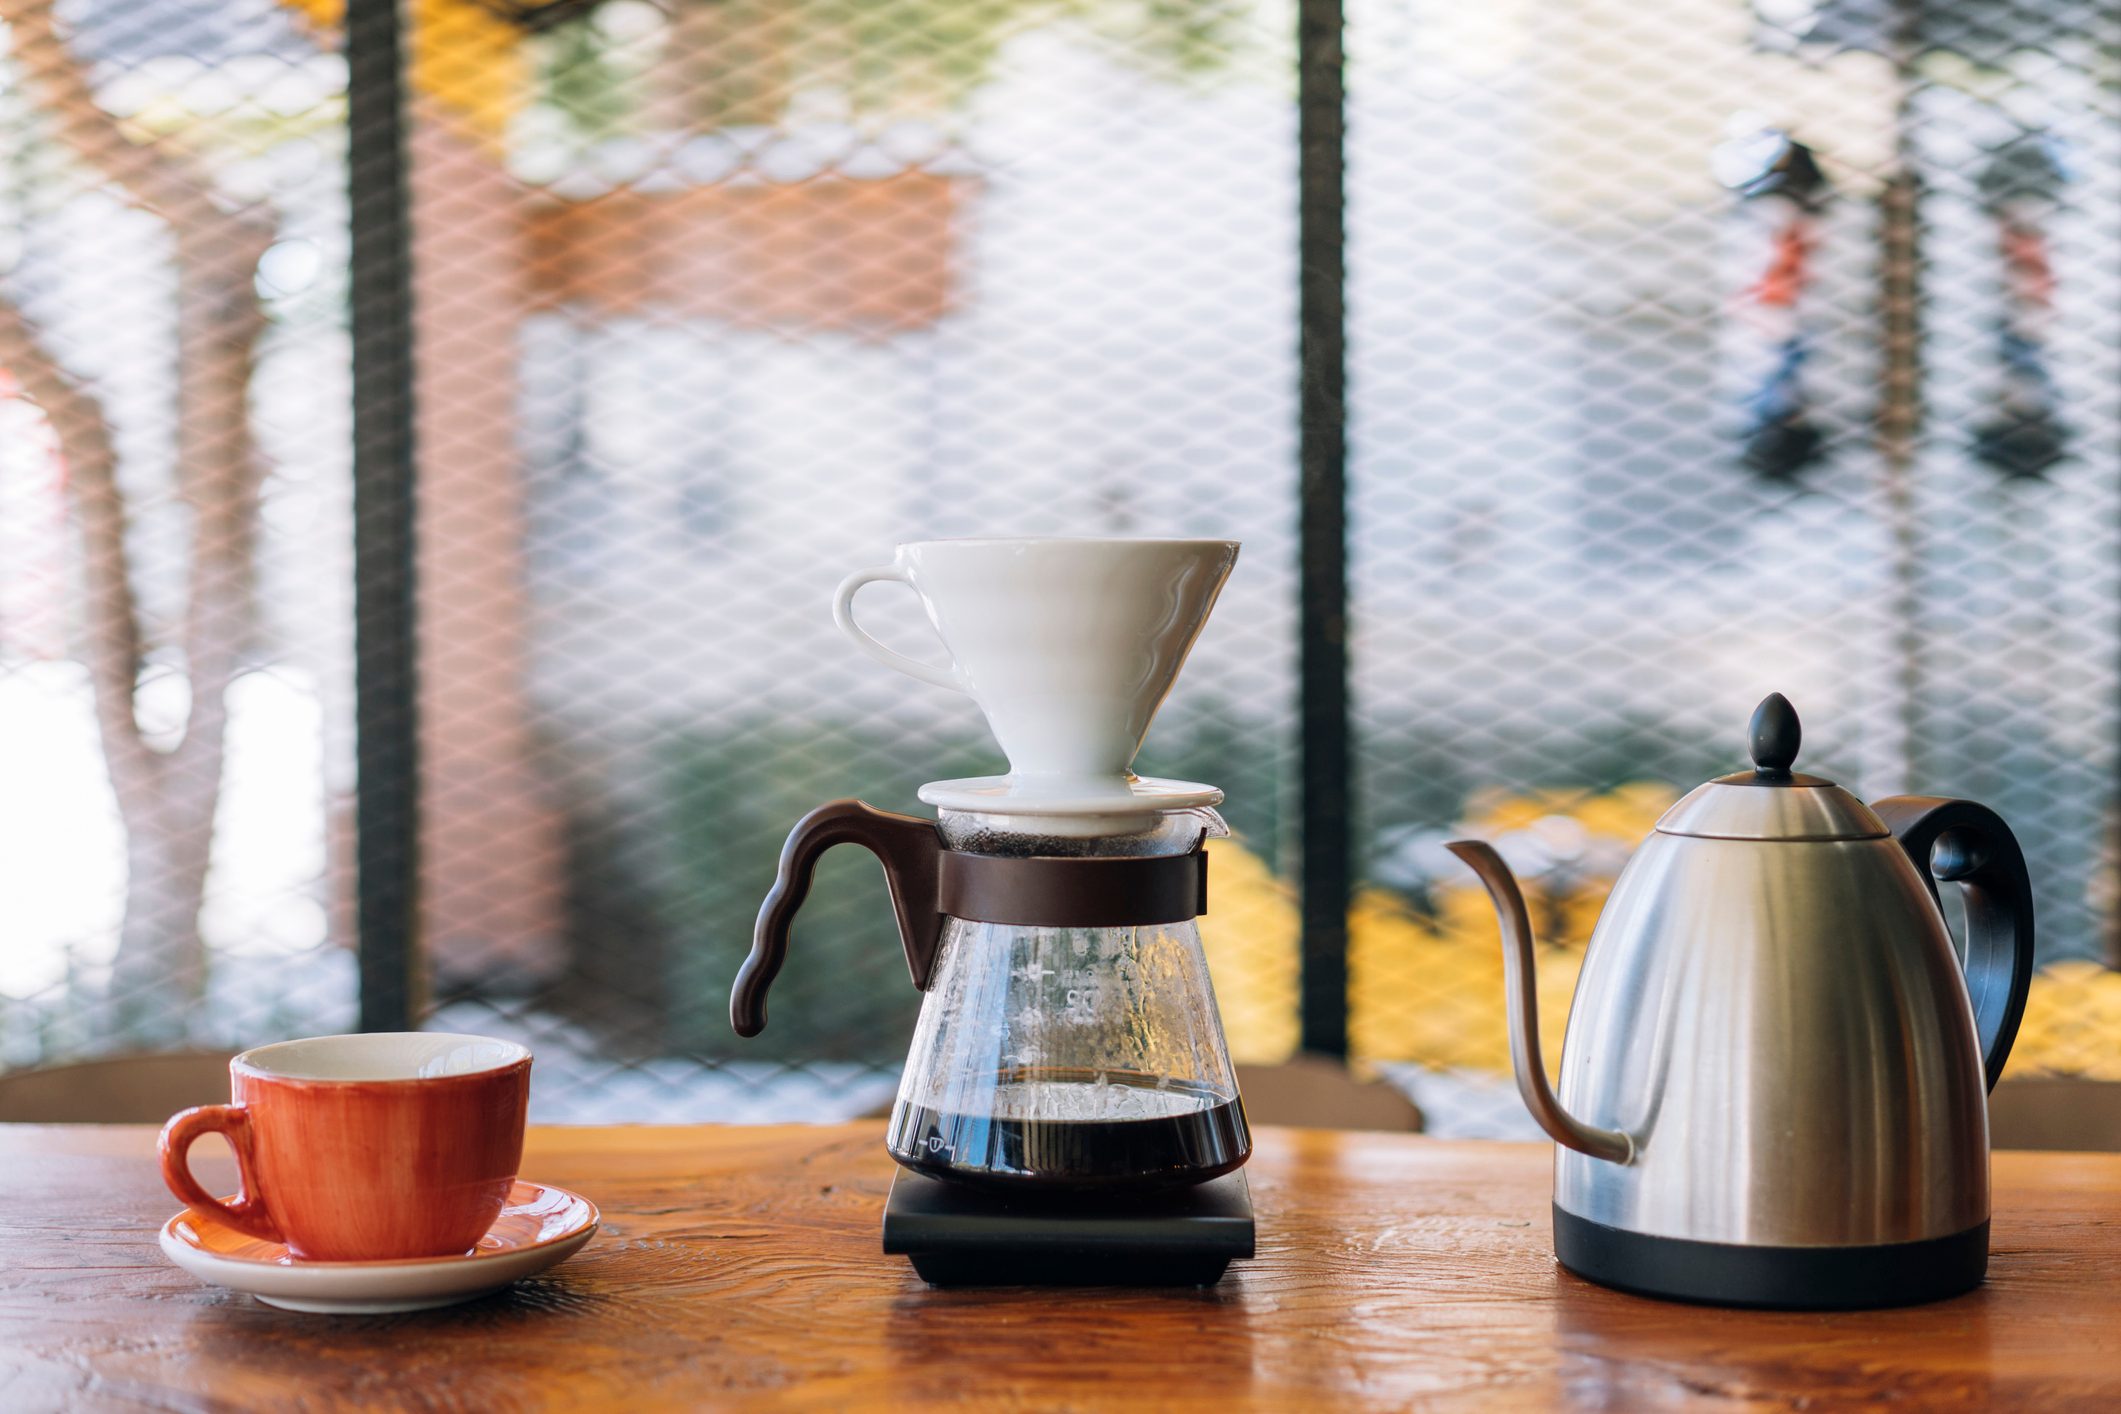 Tips  How to make pour over coffee at home - NTUC FairPrice